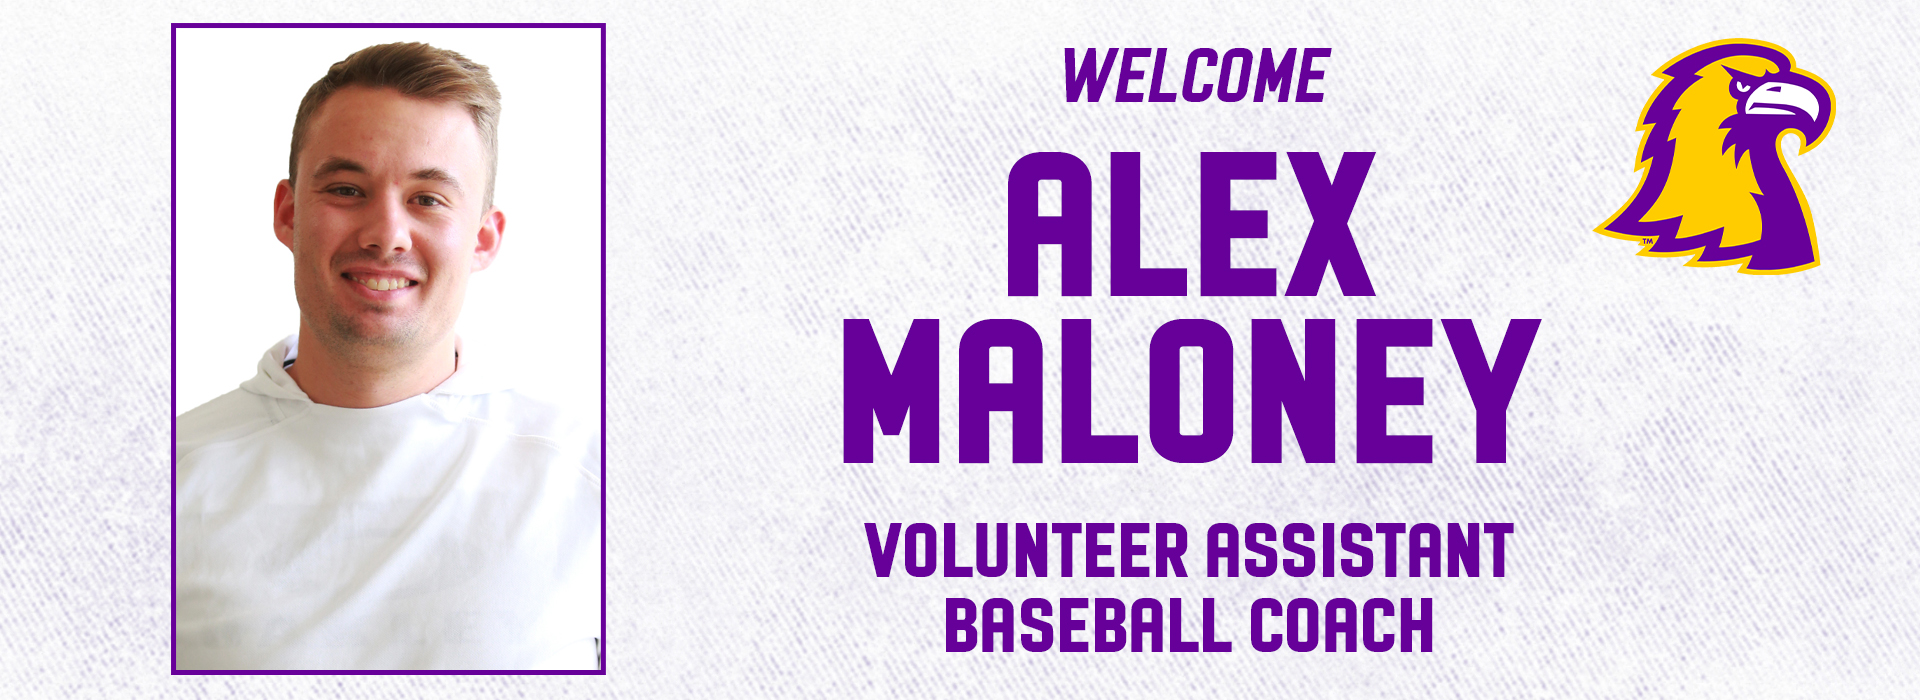 Alex Maloney added to Tech baseball staff as volunteer assistant coach